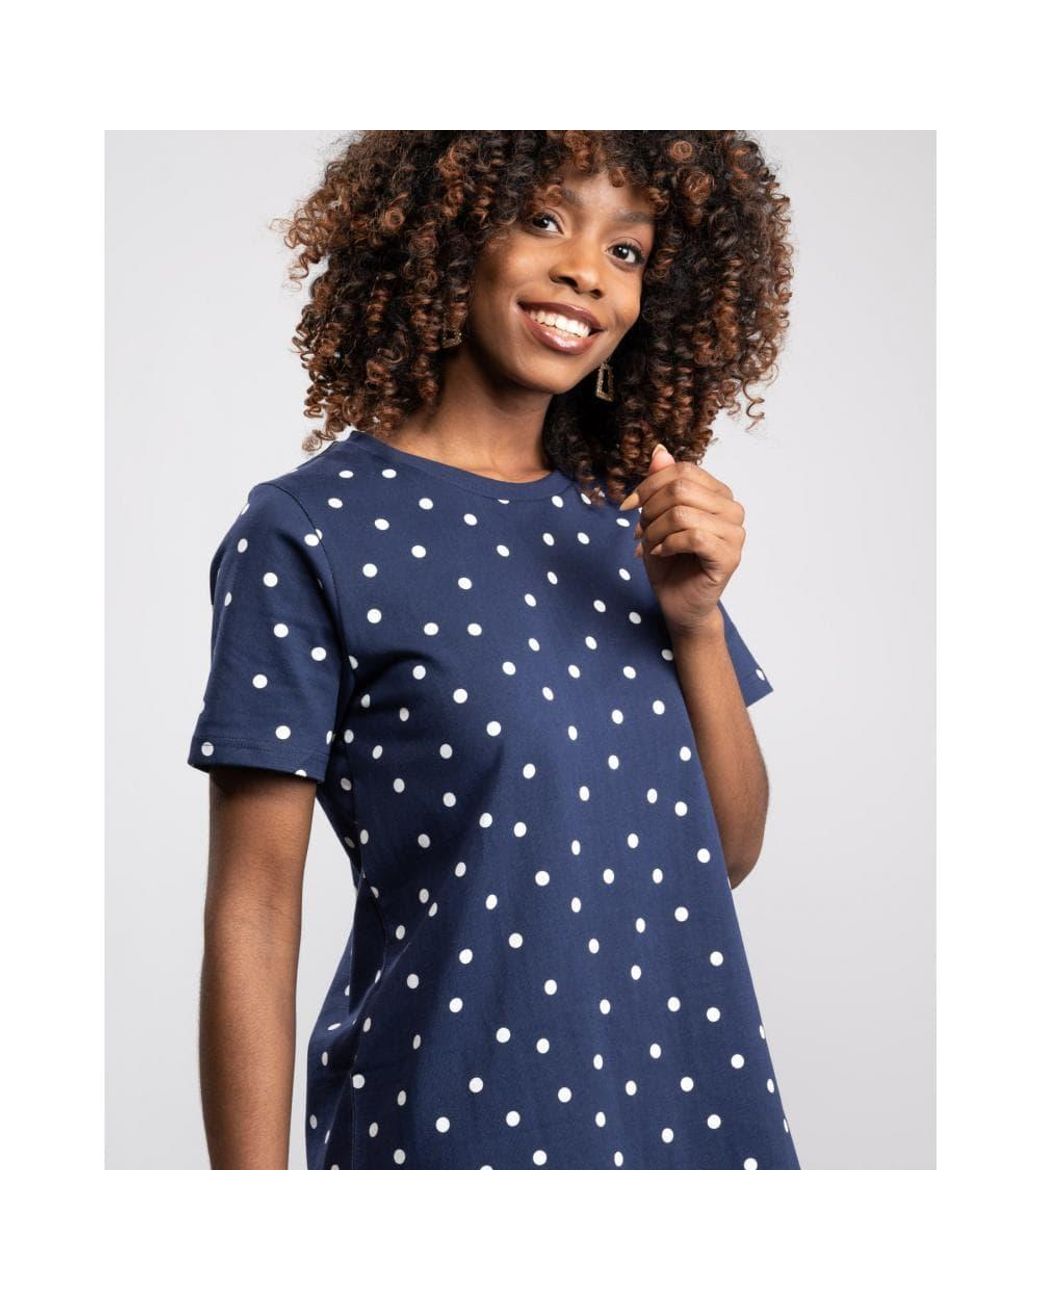 Joules Liberty Print Dress in Blue | Lyst